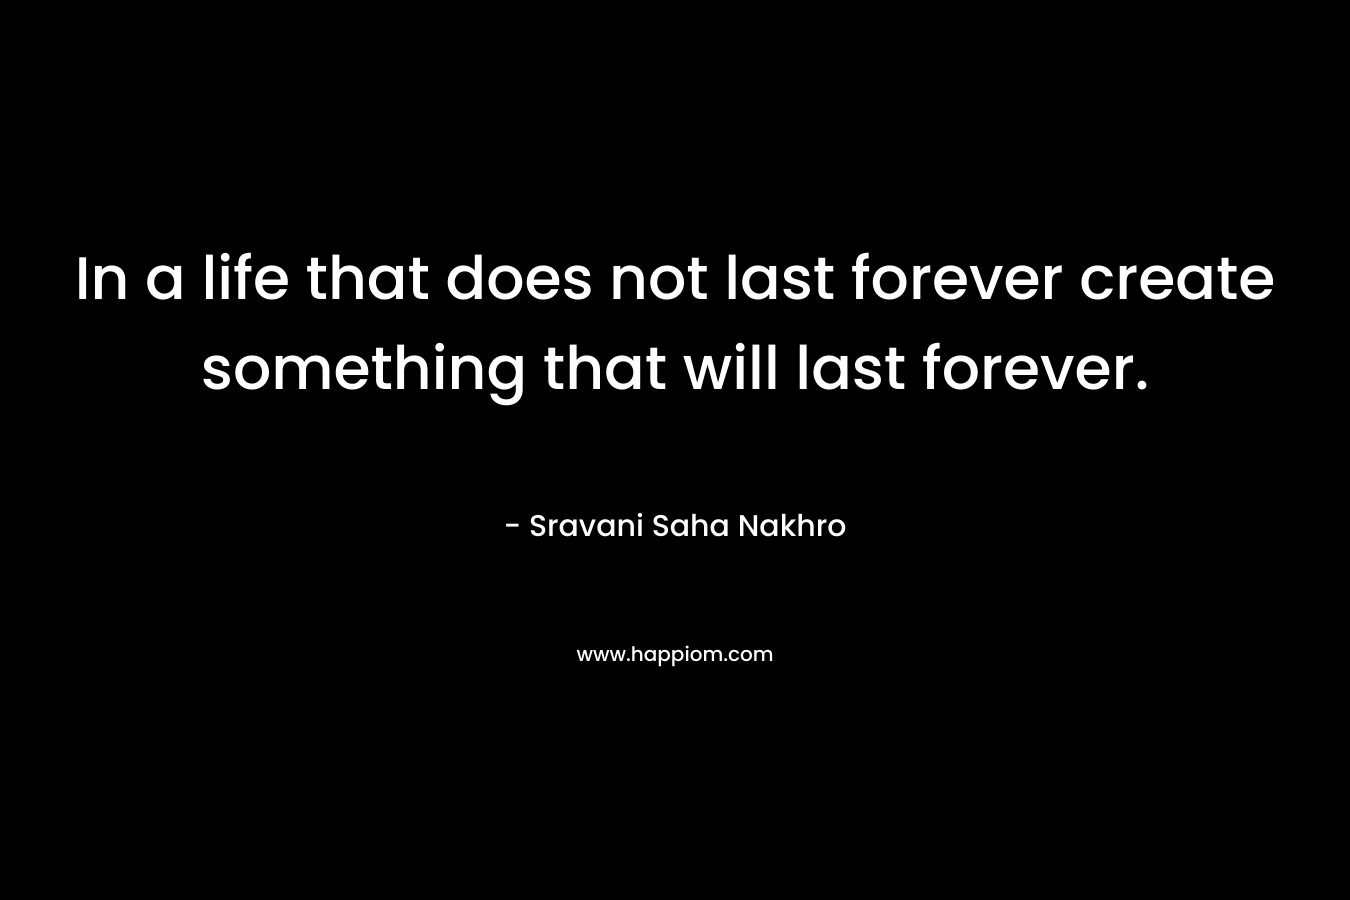 In a life that does not last forever create something that will last forever.